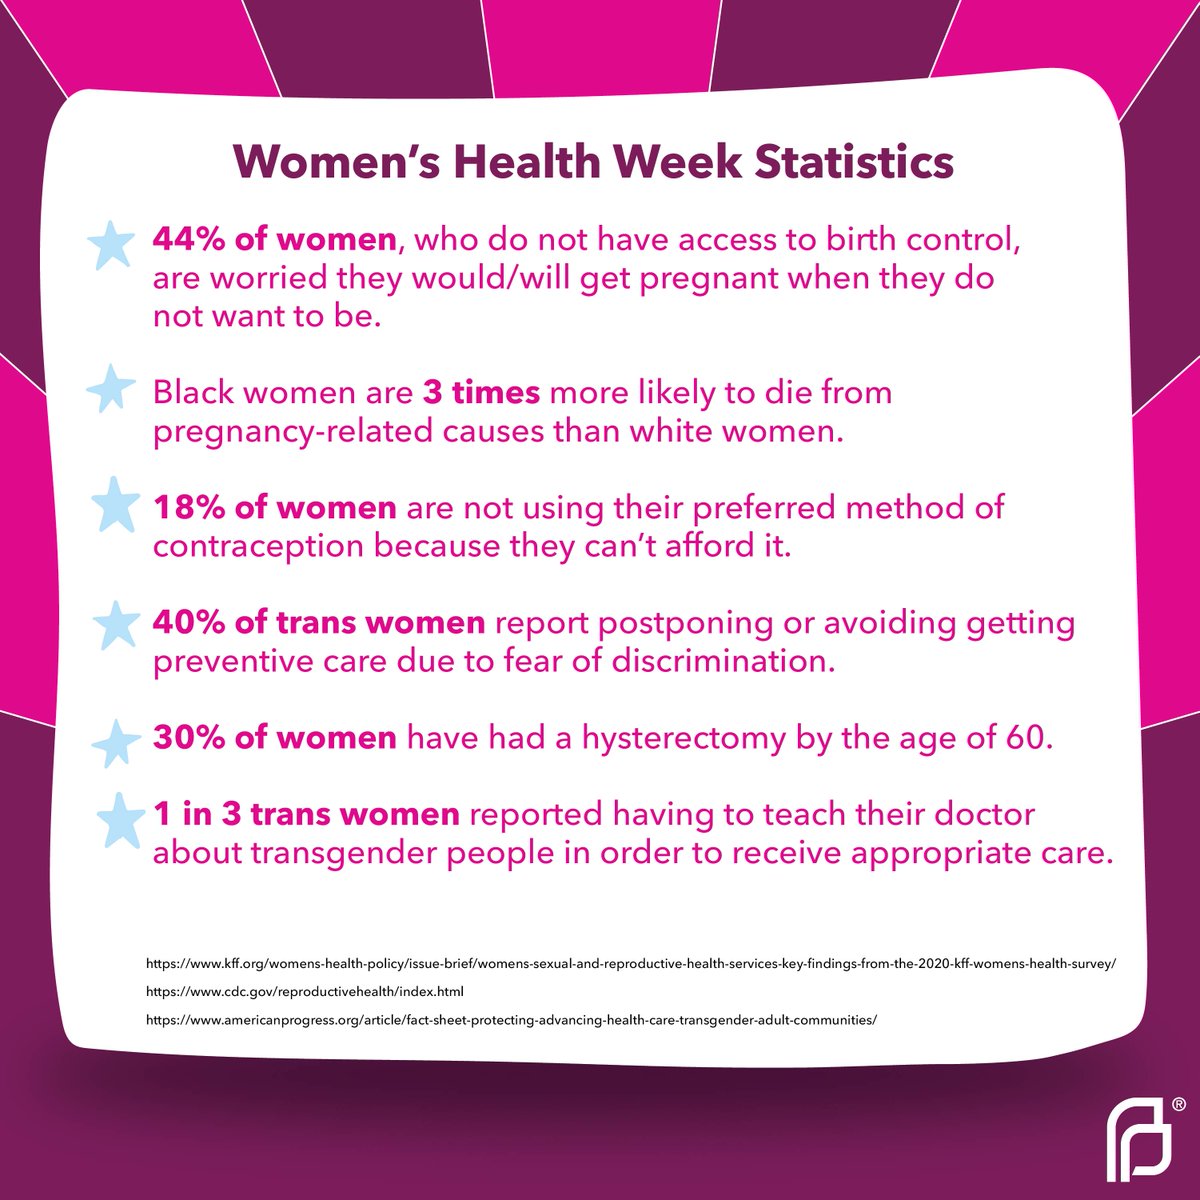 It is #WomensHealthWeek! At Planned Parenthood, we believe everyone should have access to comprehensive, accessible, and affordable sexual and reproductive health care.